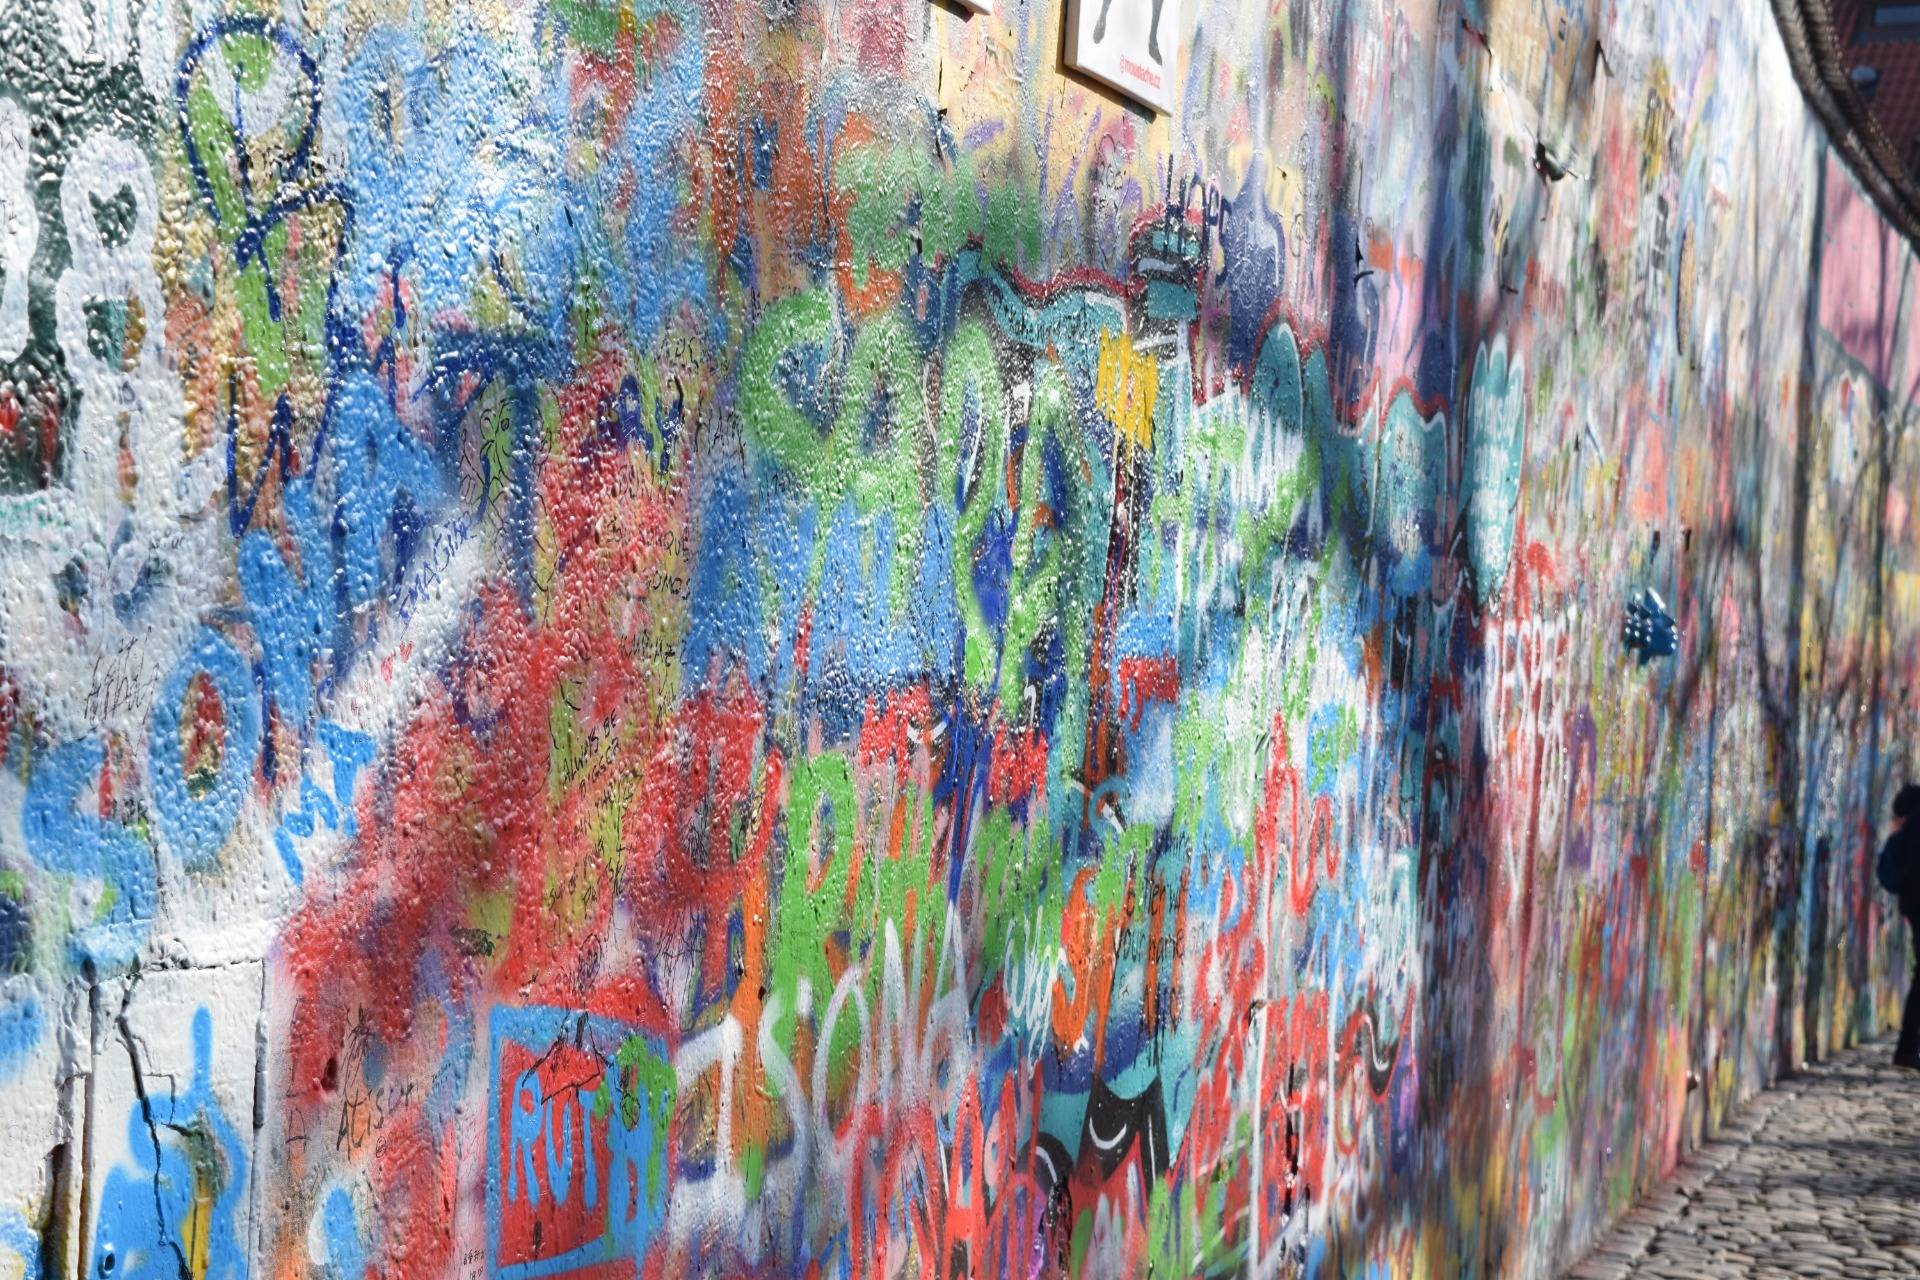 The colorful Lennon wall!